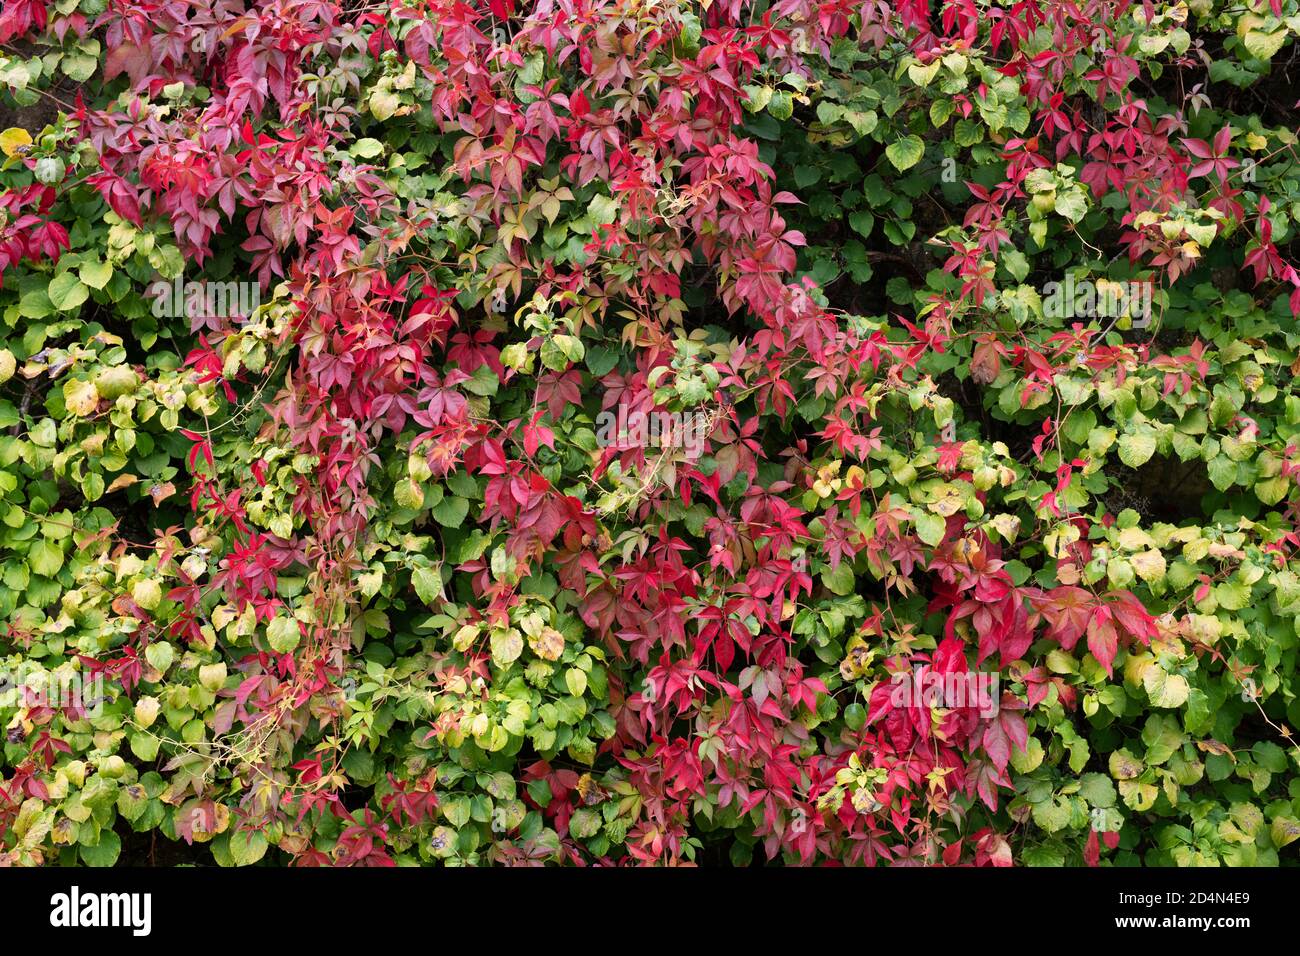 Parthenocissus quinquefolia.Virginia creeper / American ivy covering a wall. Cotswolds, Oxfordshire, England Stock Photo